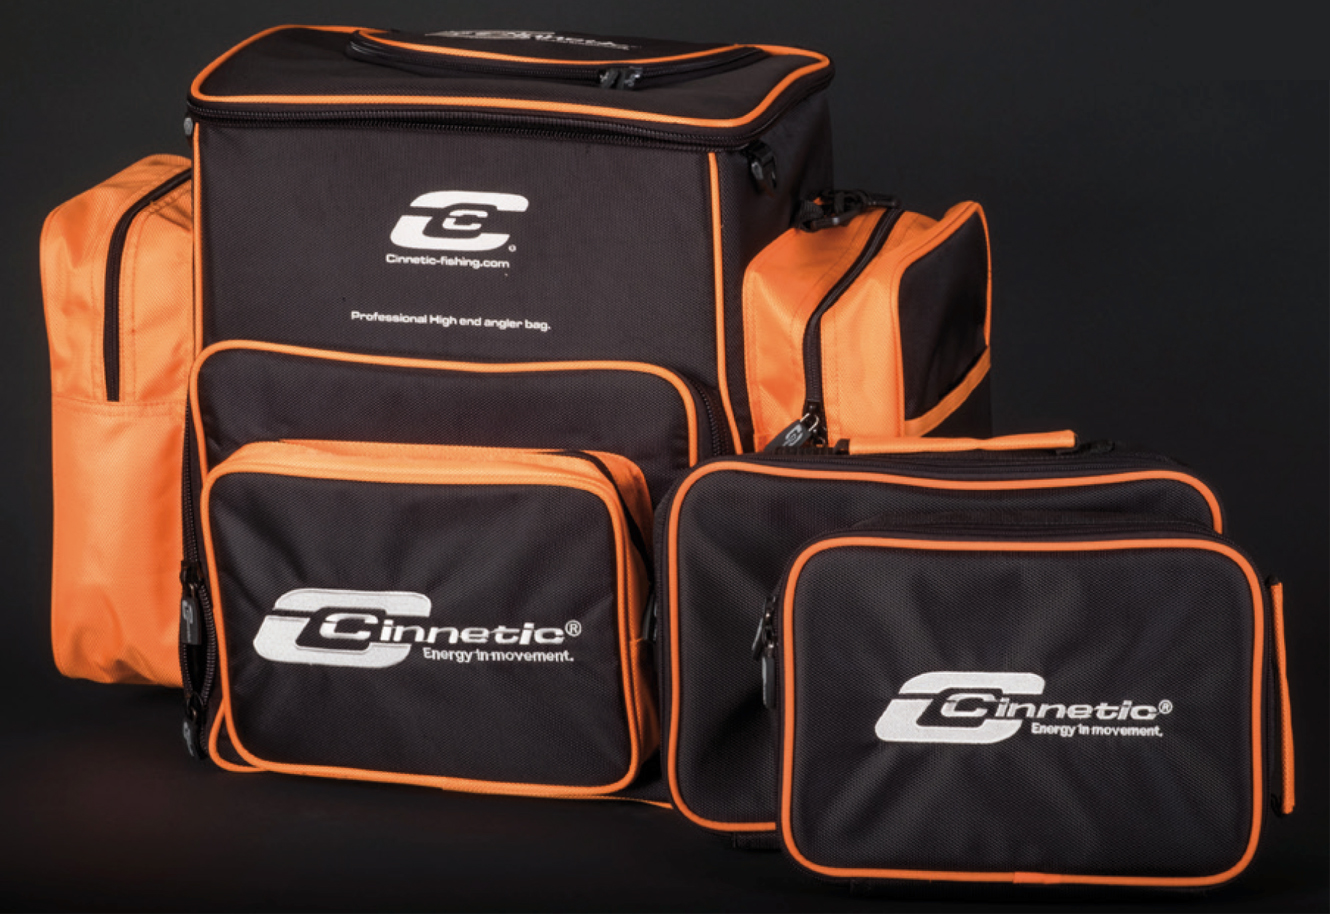 BACKPACK CINNETIC PROFESSIONAL HIGH END - Cinnetic Fishing